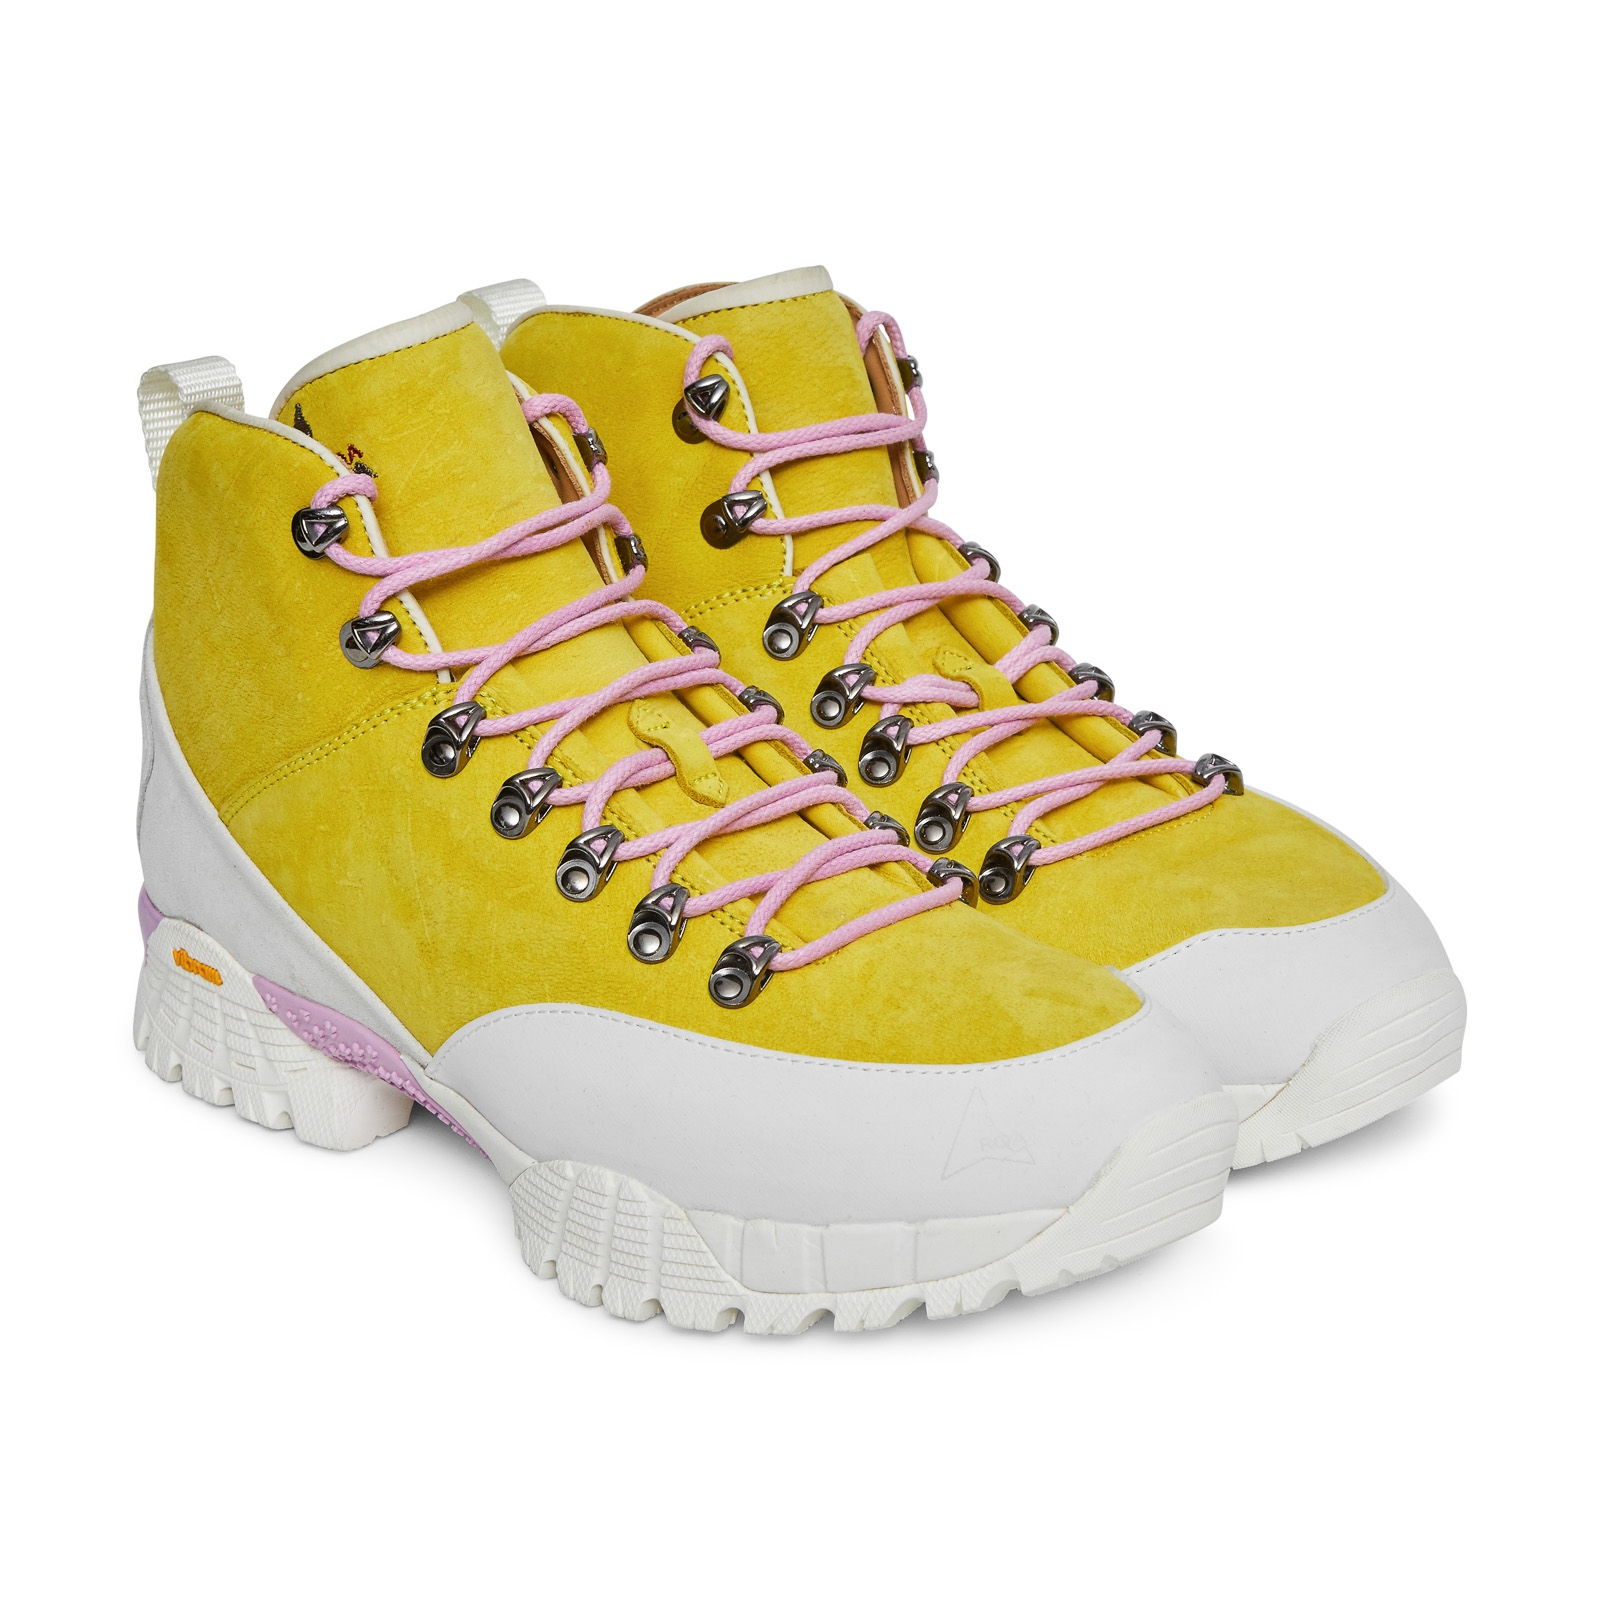 Shop these Andreas Kudu Reverse Boots in Yellow / $508 AUD